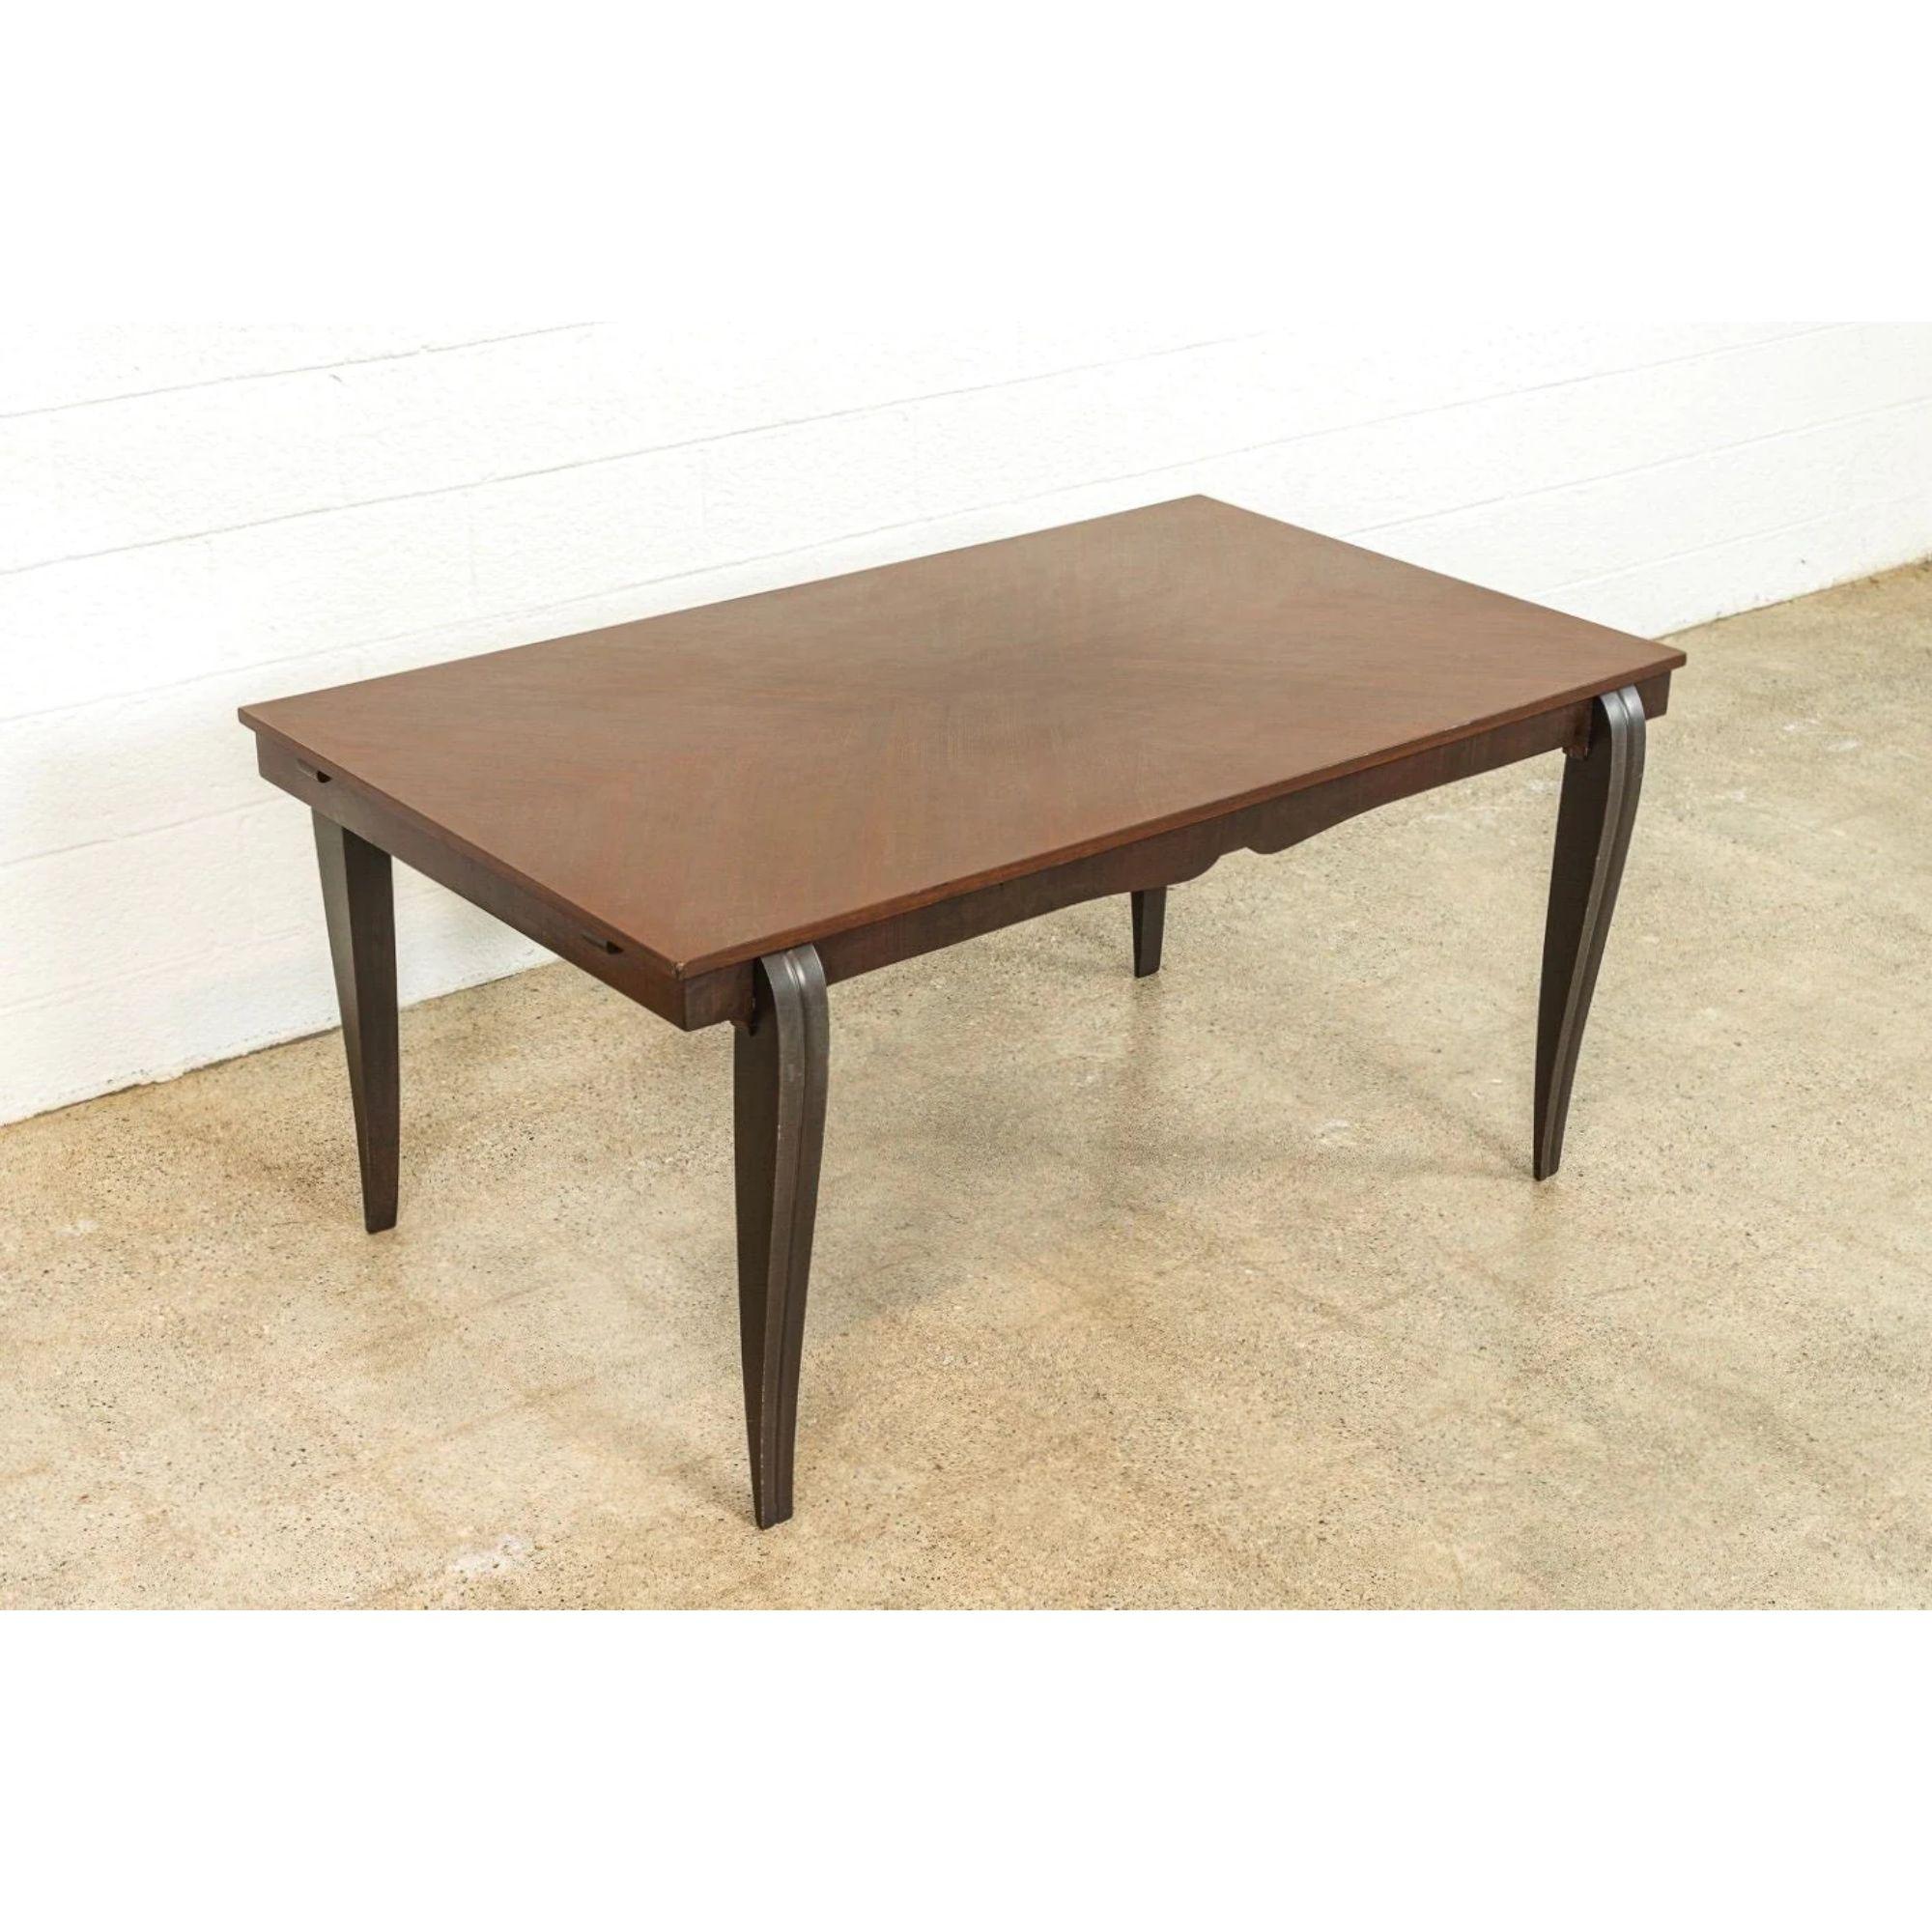 This French Art Deco carved mahogany dining table or large writing desk from the early 20th century features a beautiful geometric marquetry wood tabletop with arrow pattern supported by elegant gently curved and tapering cabriole legs. Perfect for